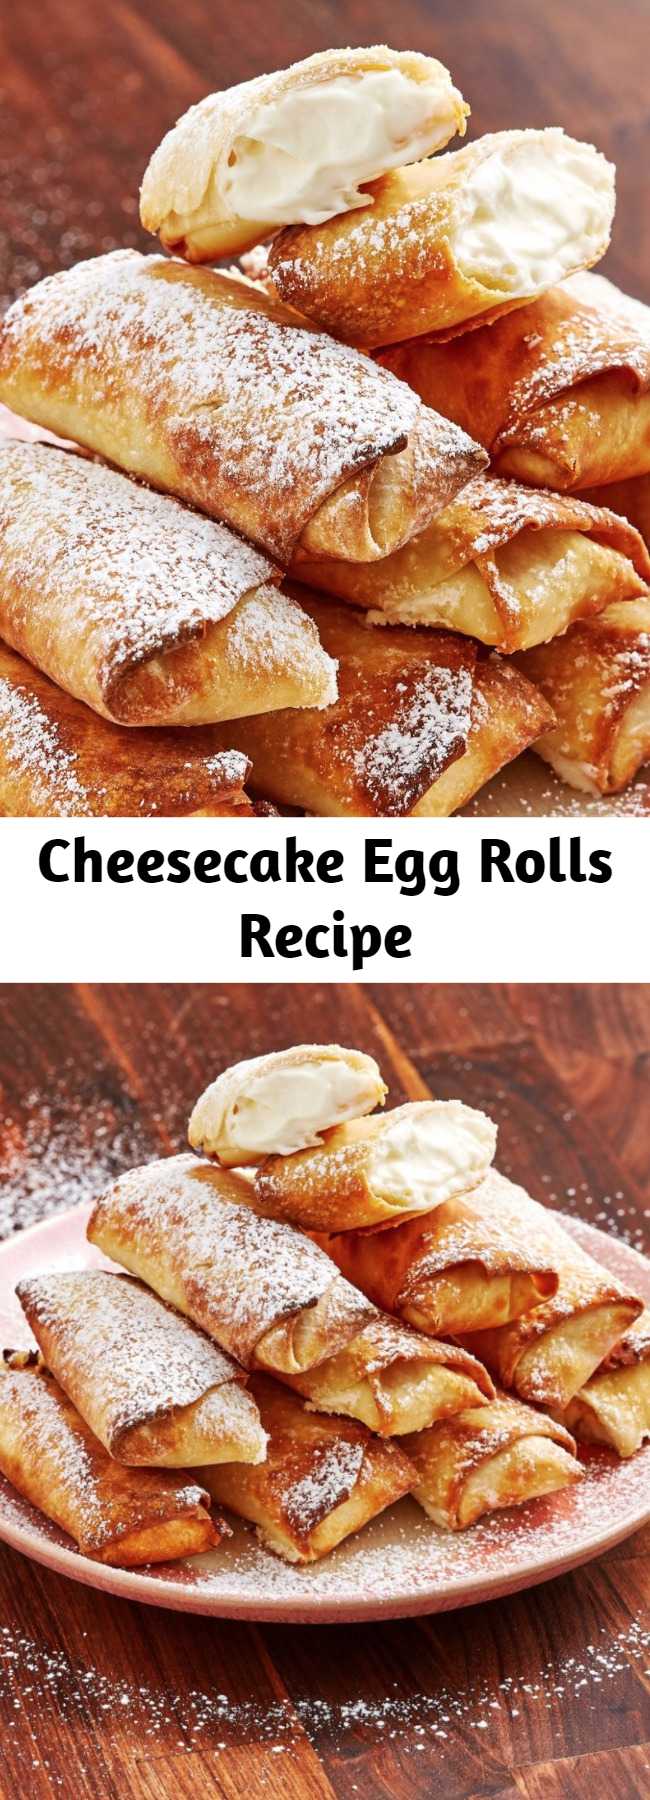 Cheesecake Egg Rolls Recipe - Crazy egg rolls are kind of our thing and we love this cheesecake version. The strawberry dipping sauce is mandatory because it is so good. You've never had cheesecake like this before.